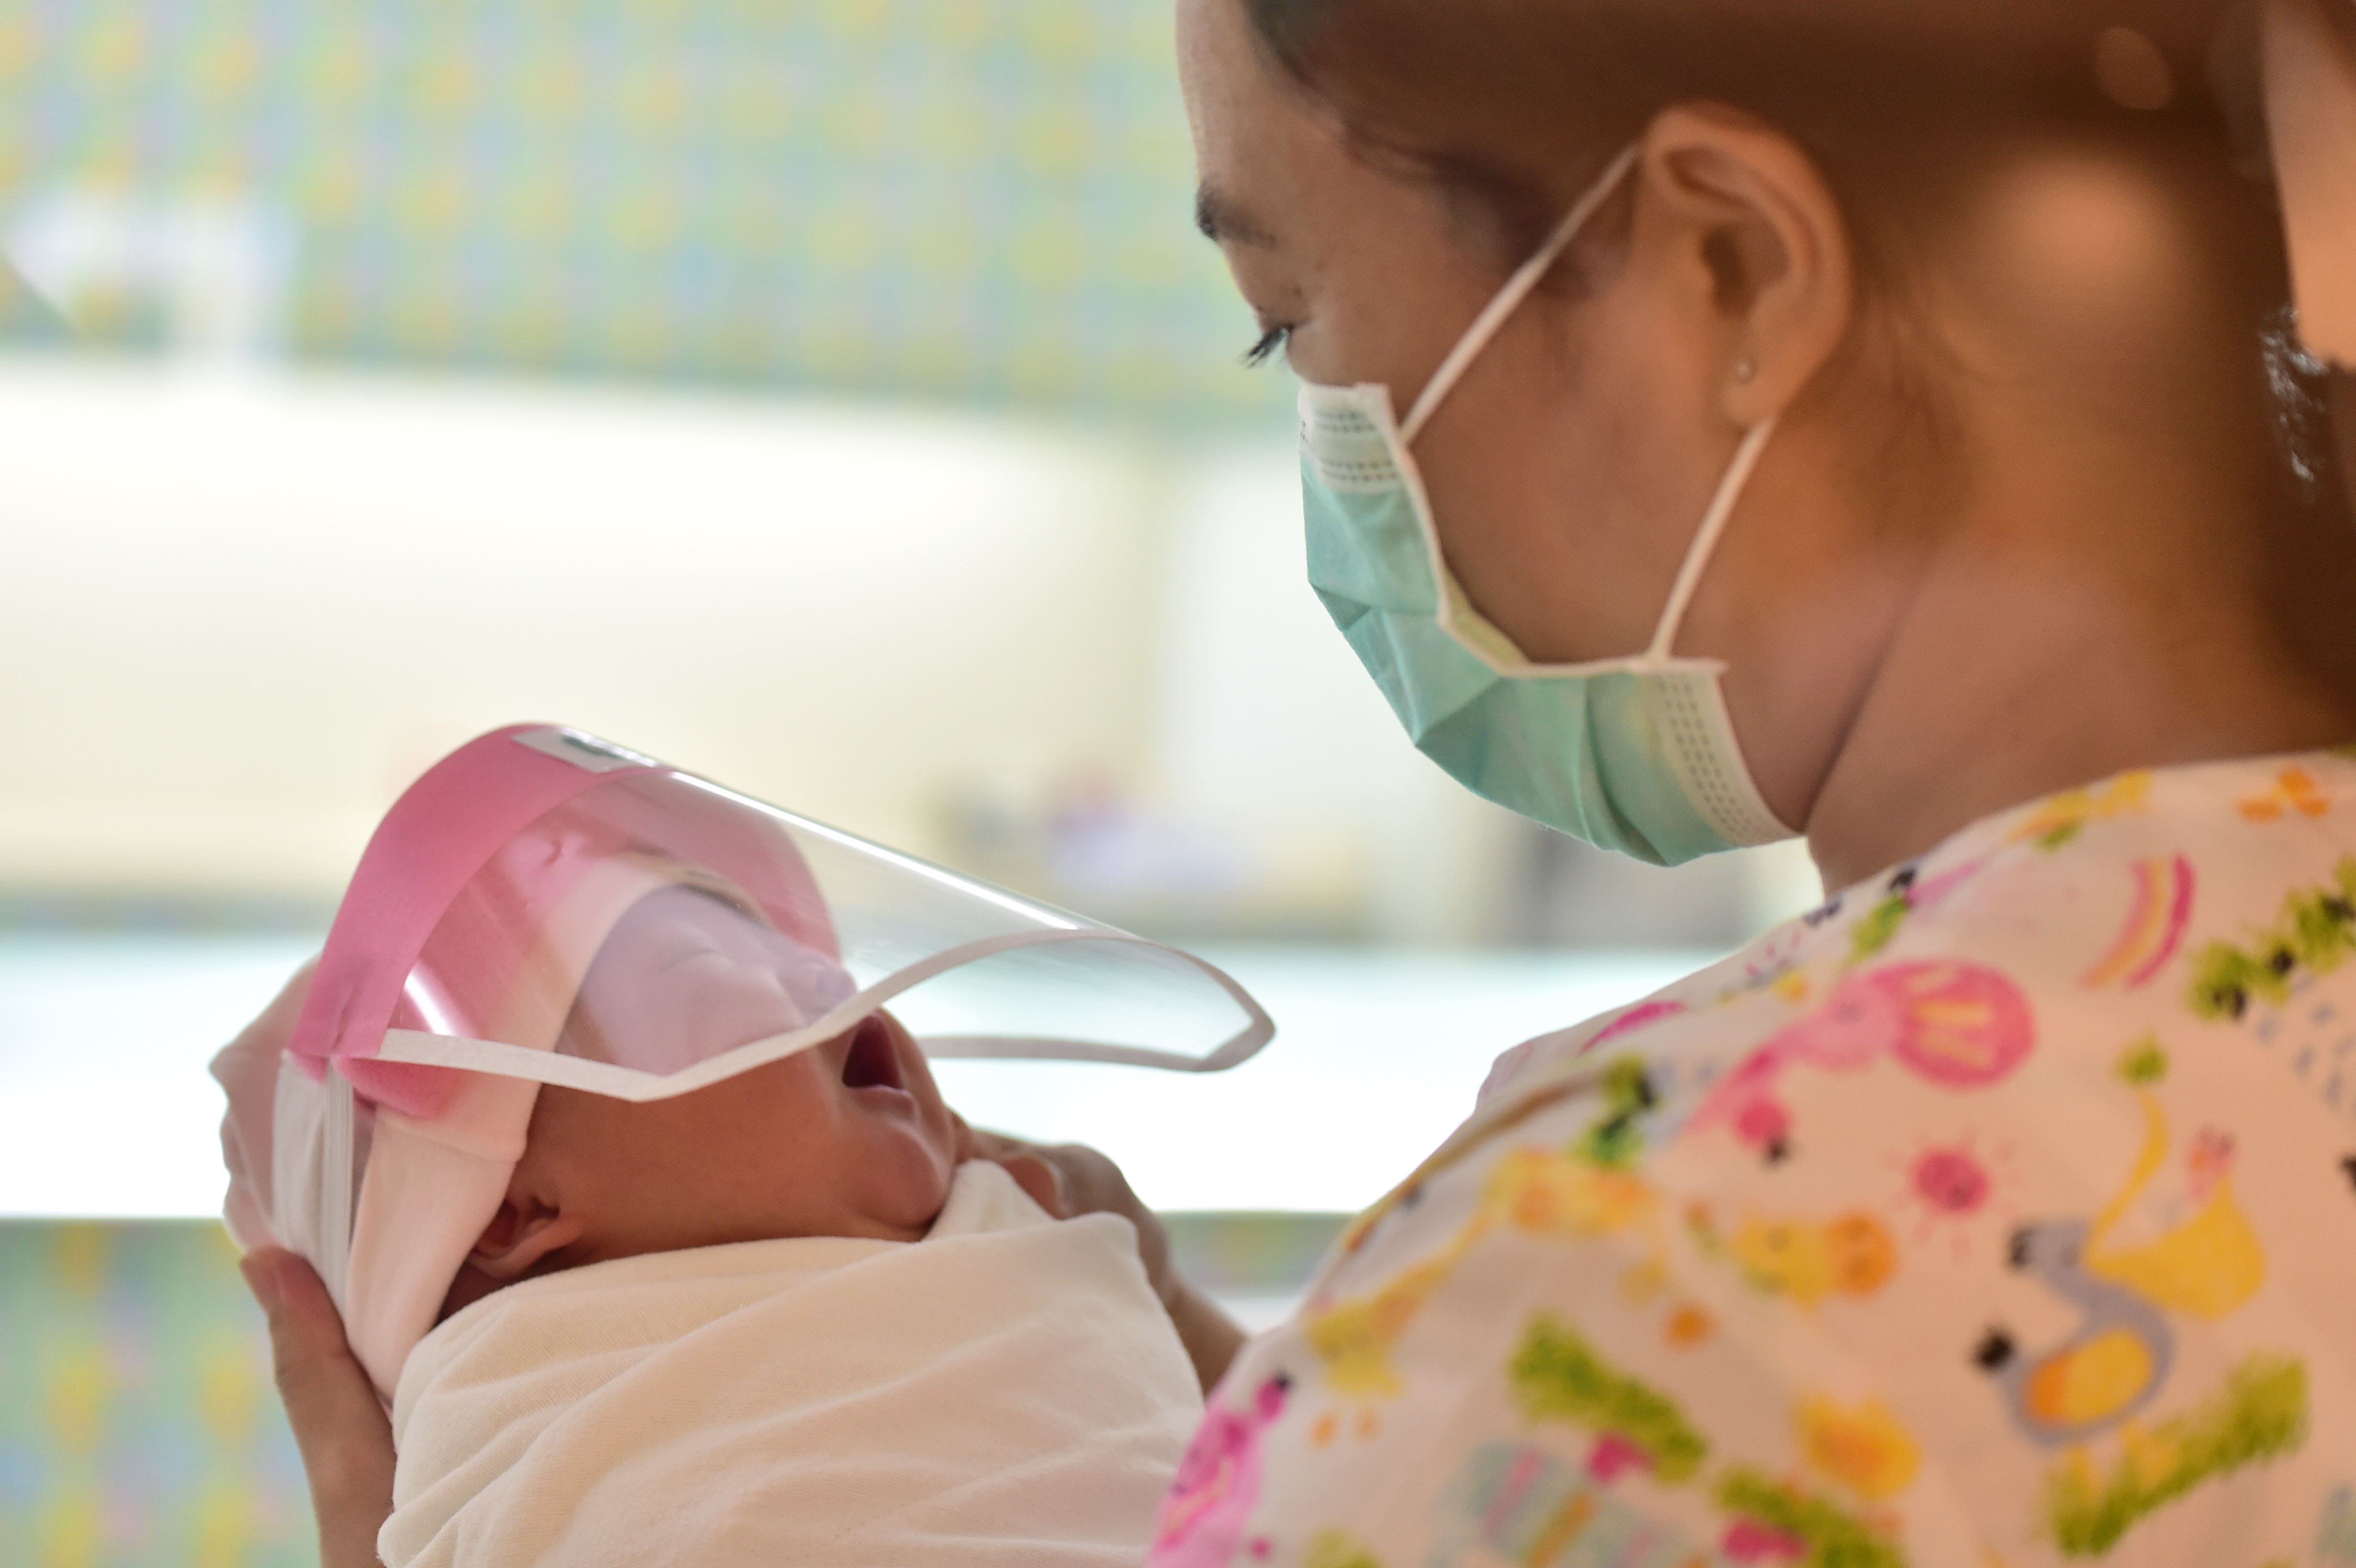 This photo taken through a glass window at a maternity ward shows a nurse holding a newborn baby wearing a face shield, in an effort to halt the spread of the COVID-19 coronavirus, at Praram 9 Hospital in Bangkok on April 9, 2020. (Photo by Lillian SUWANRUMPHA / AFP) (Photo by LILLIAN SUWANRUMPHA/AFP via Getty Images)